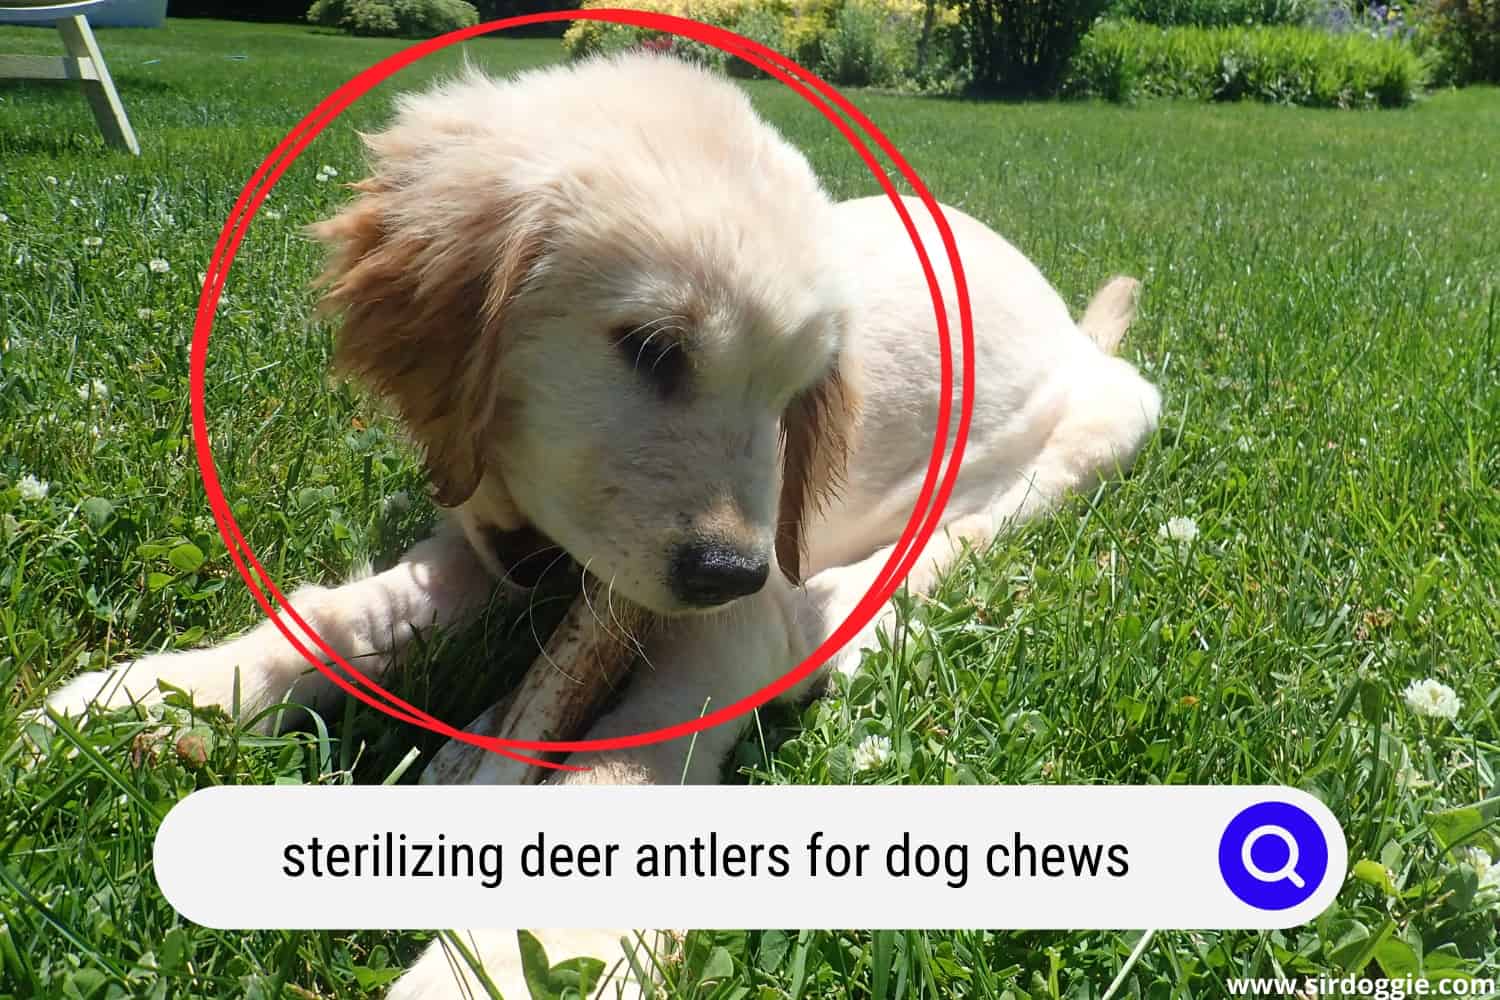 how to sterilize deer antlers for dog chews